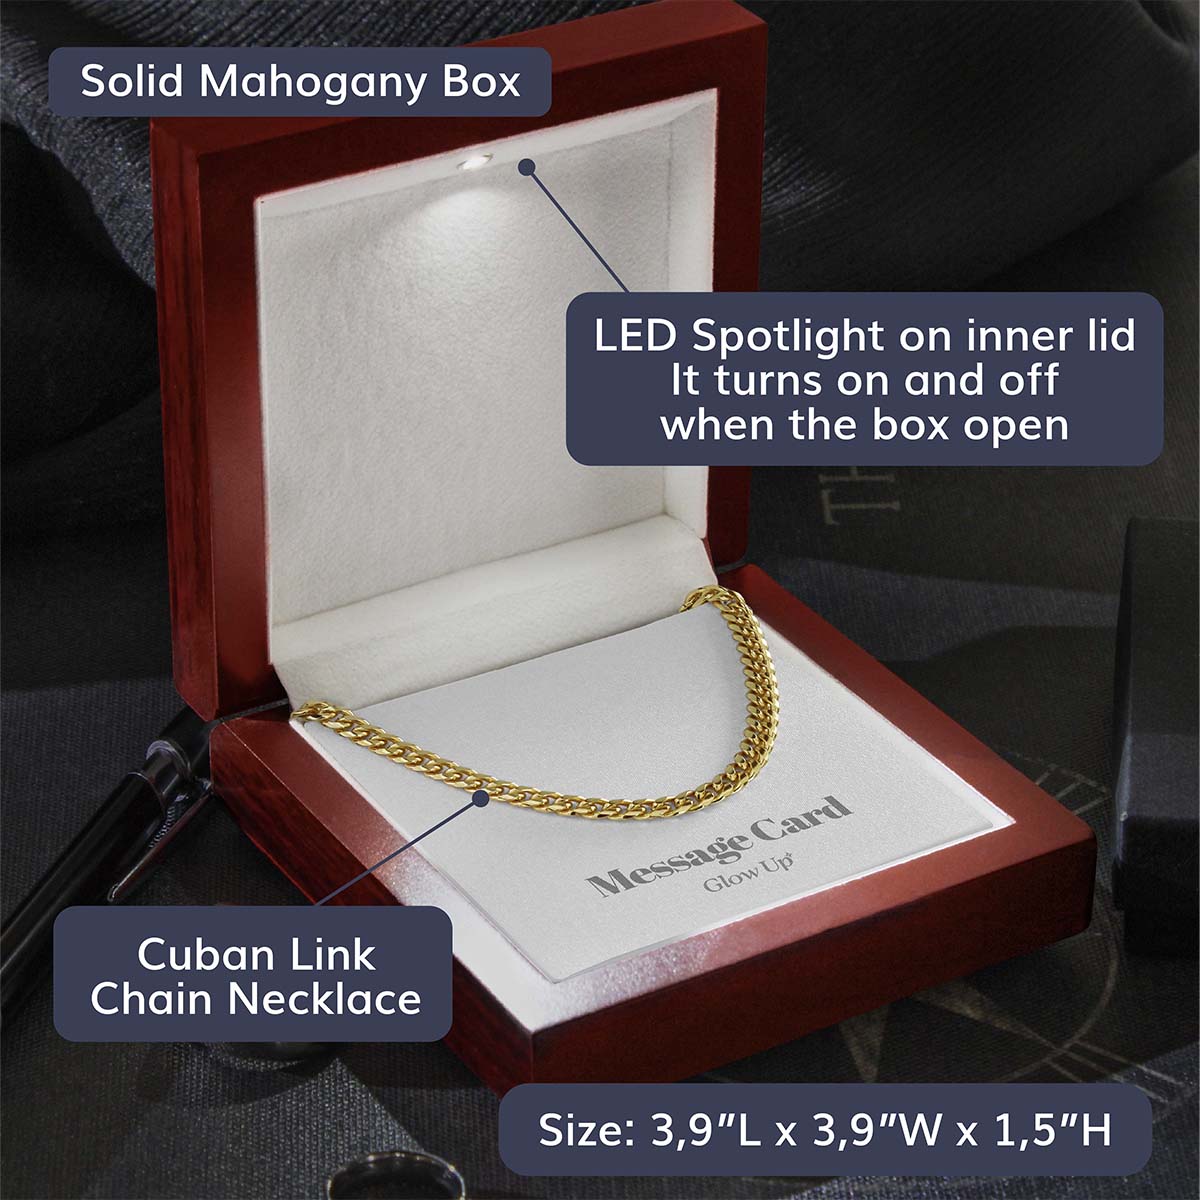 Glow Up Cuban Link Chain 18k Gold Over Stainless Steel / Luxury LED Box Cuban Link Chain - 5mm